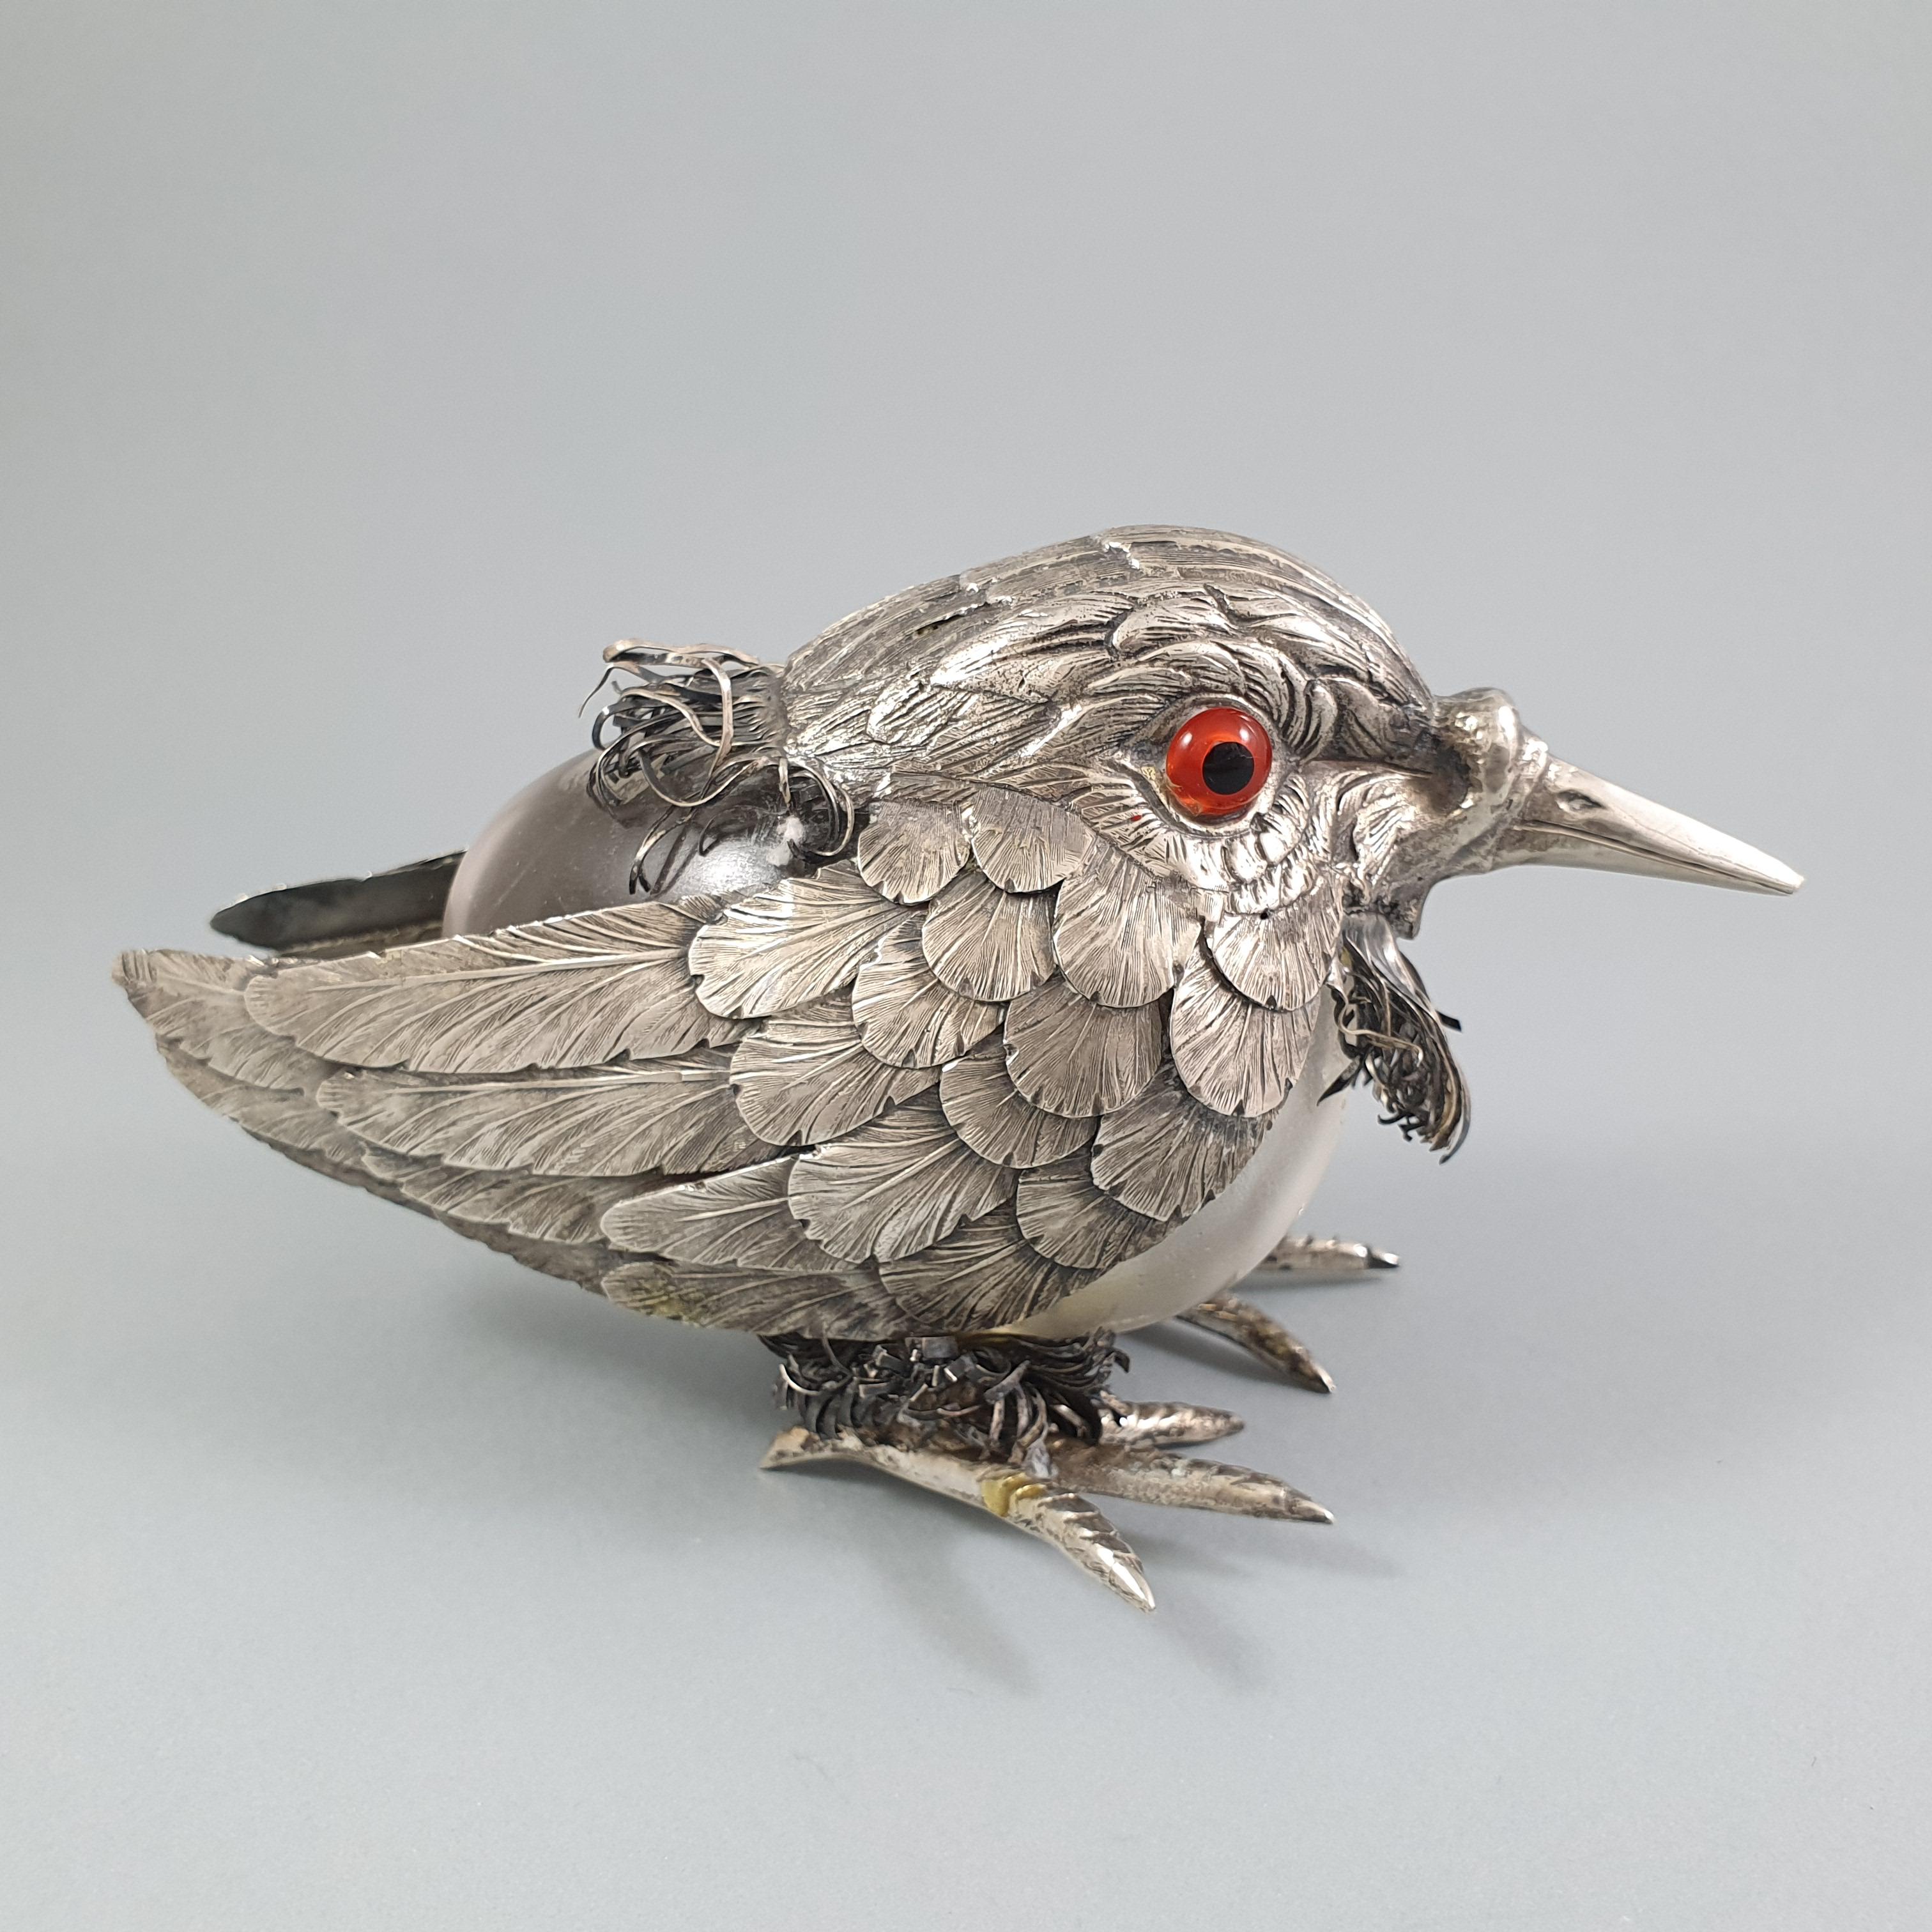 Bird in Sterling Silver and crystal
Italian work around 1970 by Gabriele De Vecchi 

Silver hallmark 800 Number 665 MI and initials for De Vecchi in Milan 
Length: 14.5 cm 
Height: 8 cm

Good condition.